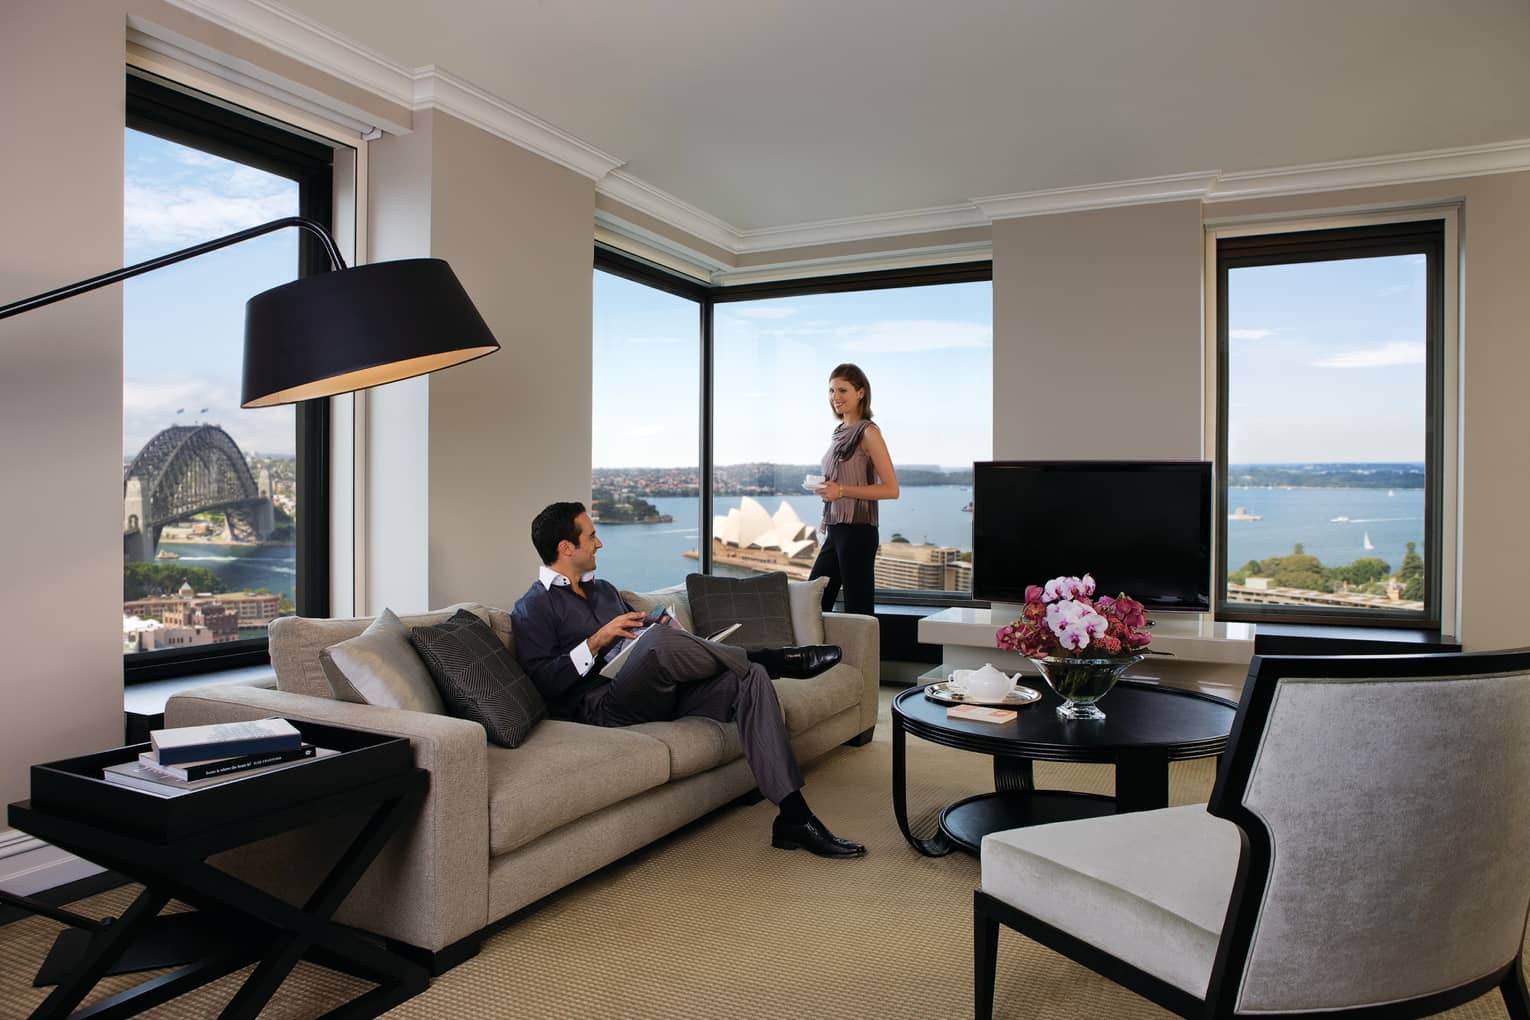 Presidential Suite, woman stands at corner windows, man reads magazine on sofa